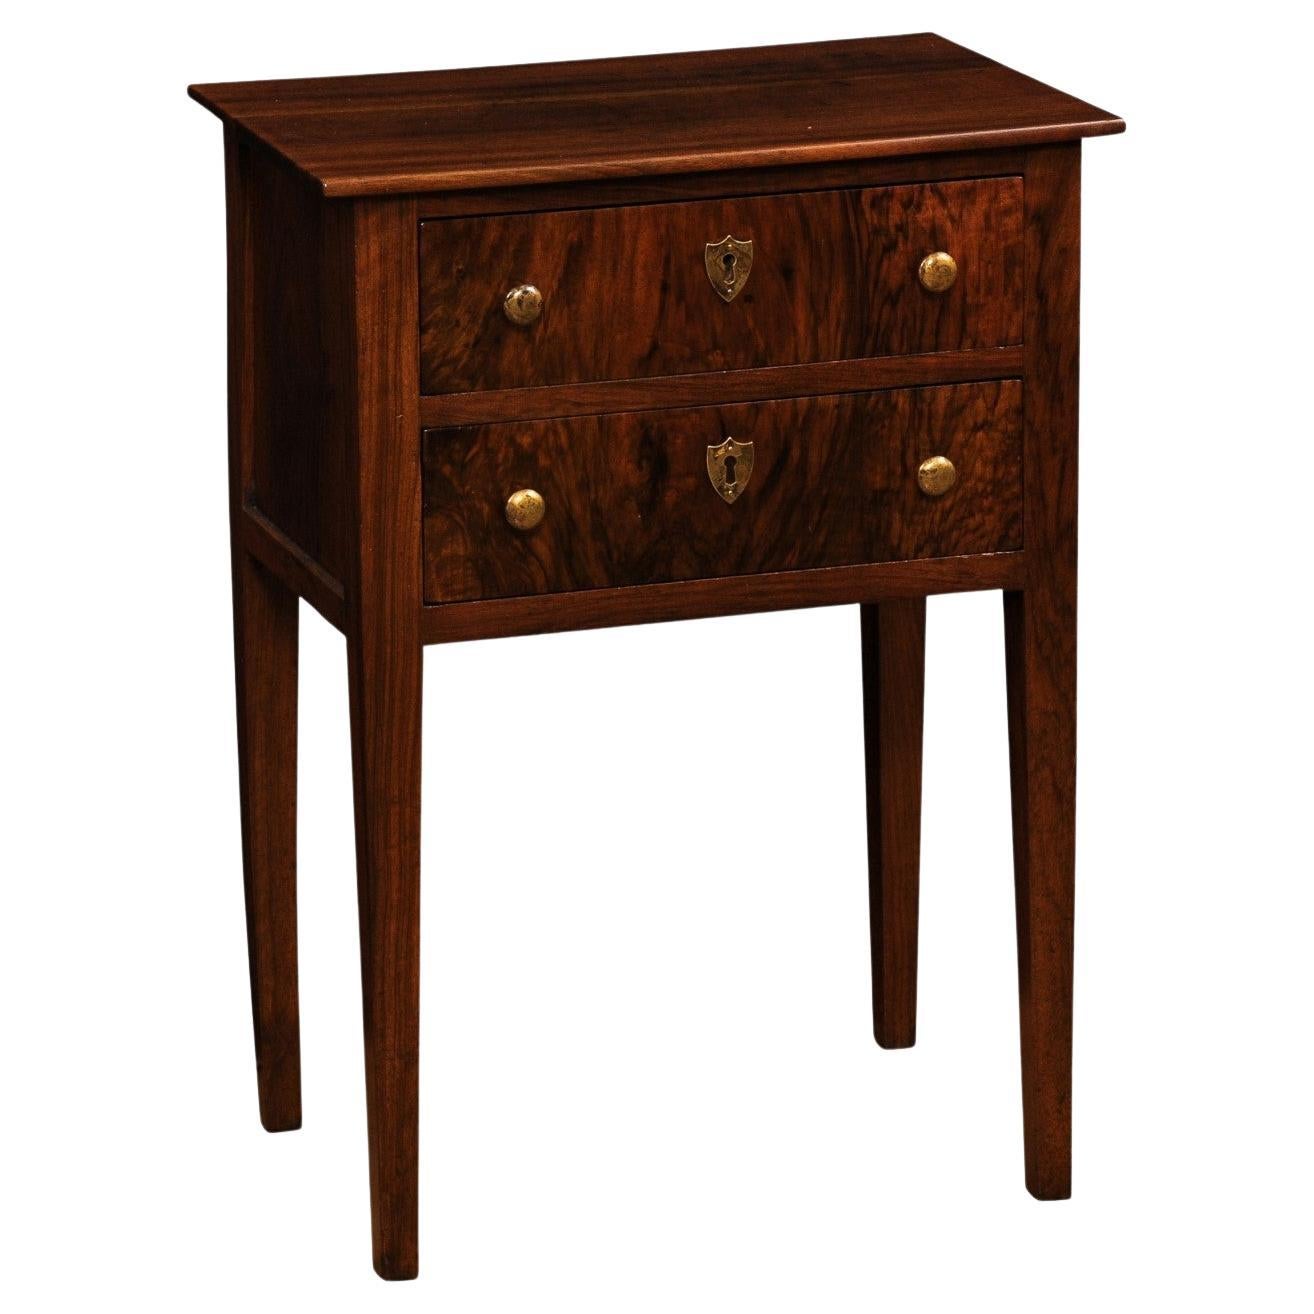 Italian Directoire 19th Century Walnut Bedside Table with Two Veneered Drawers